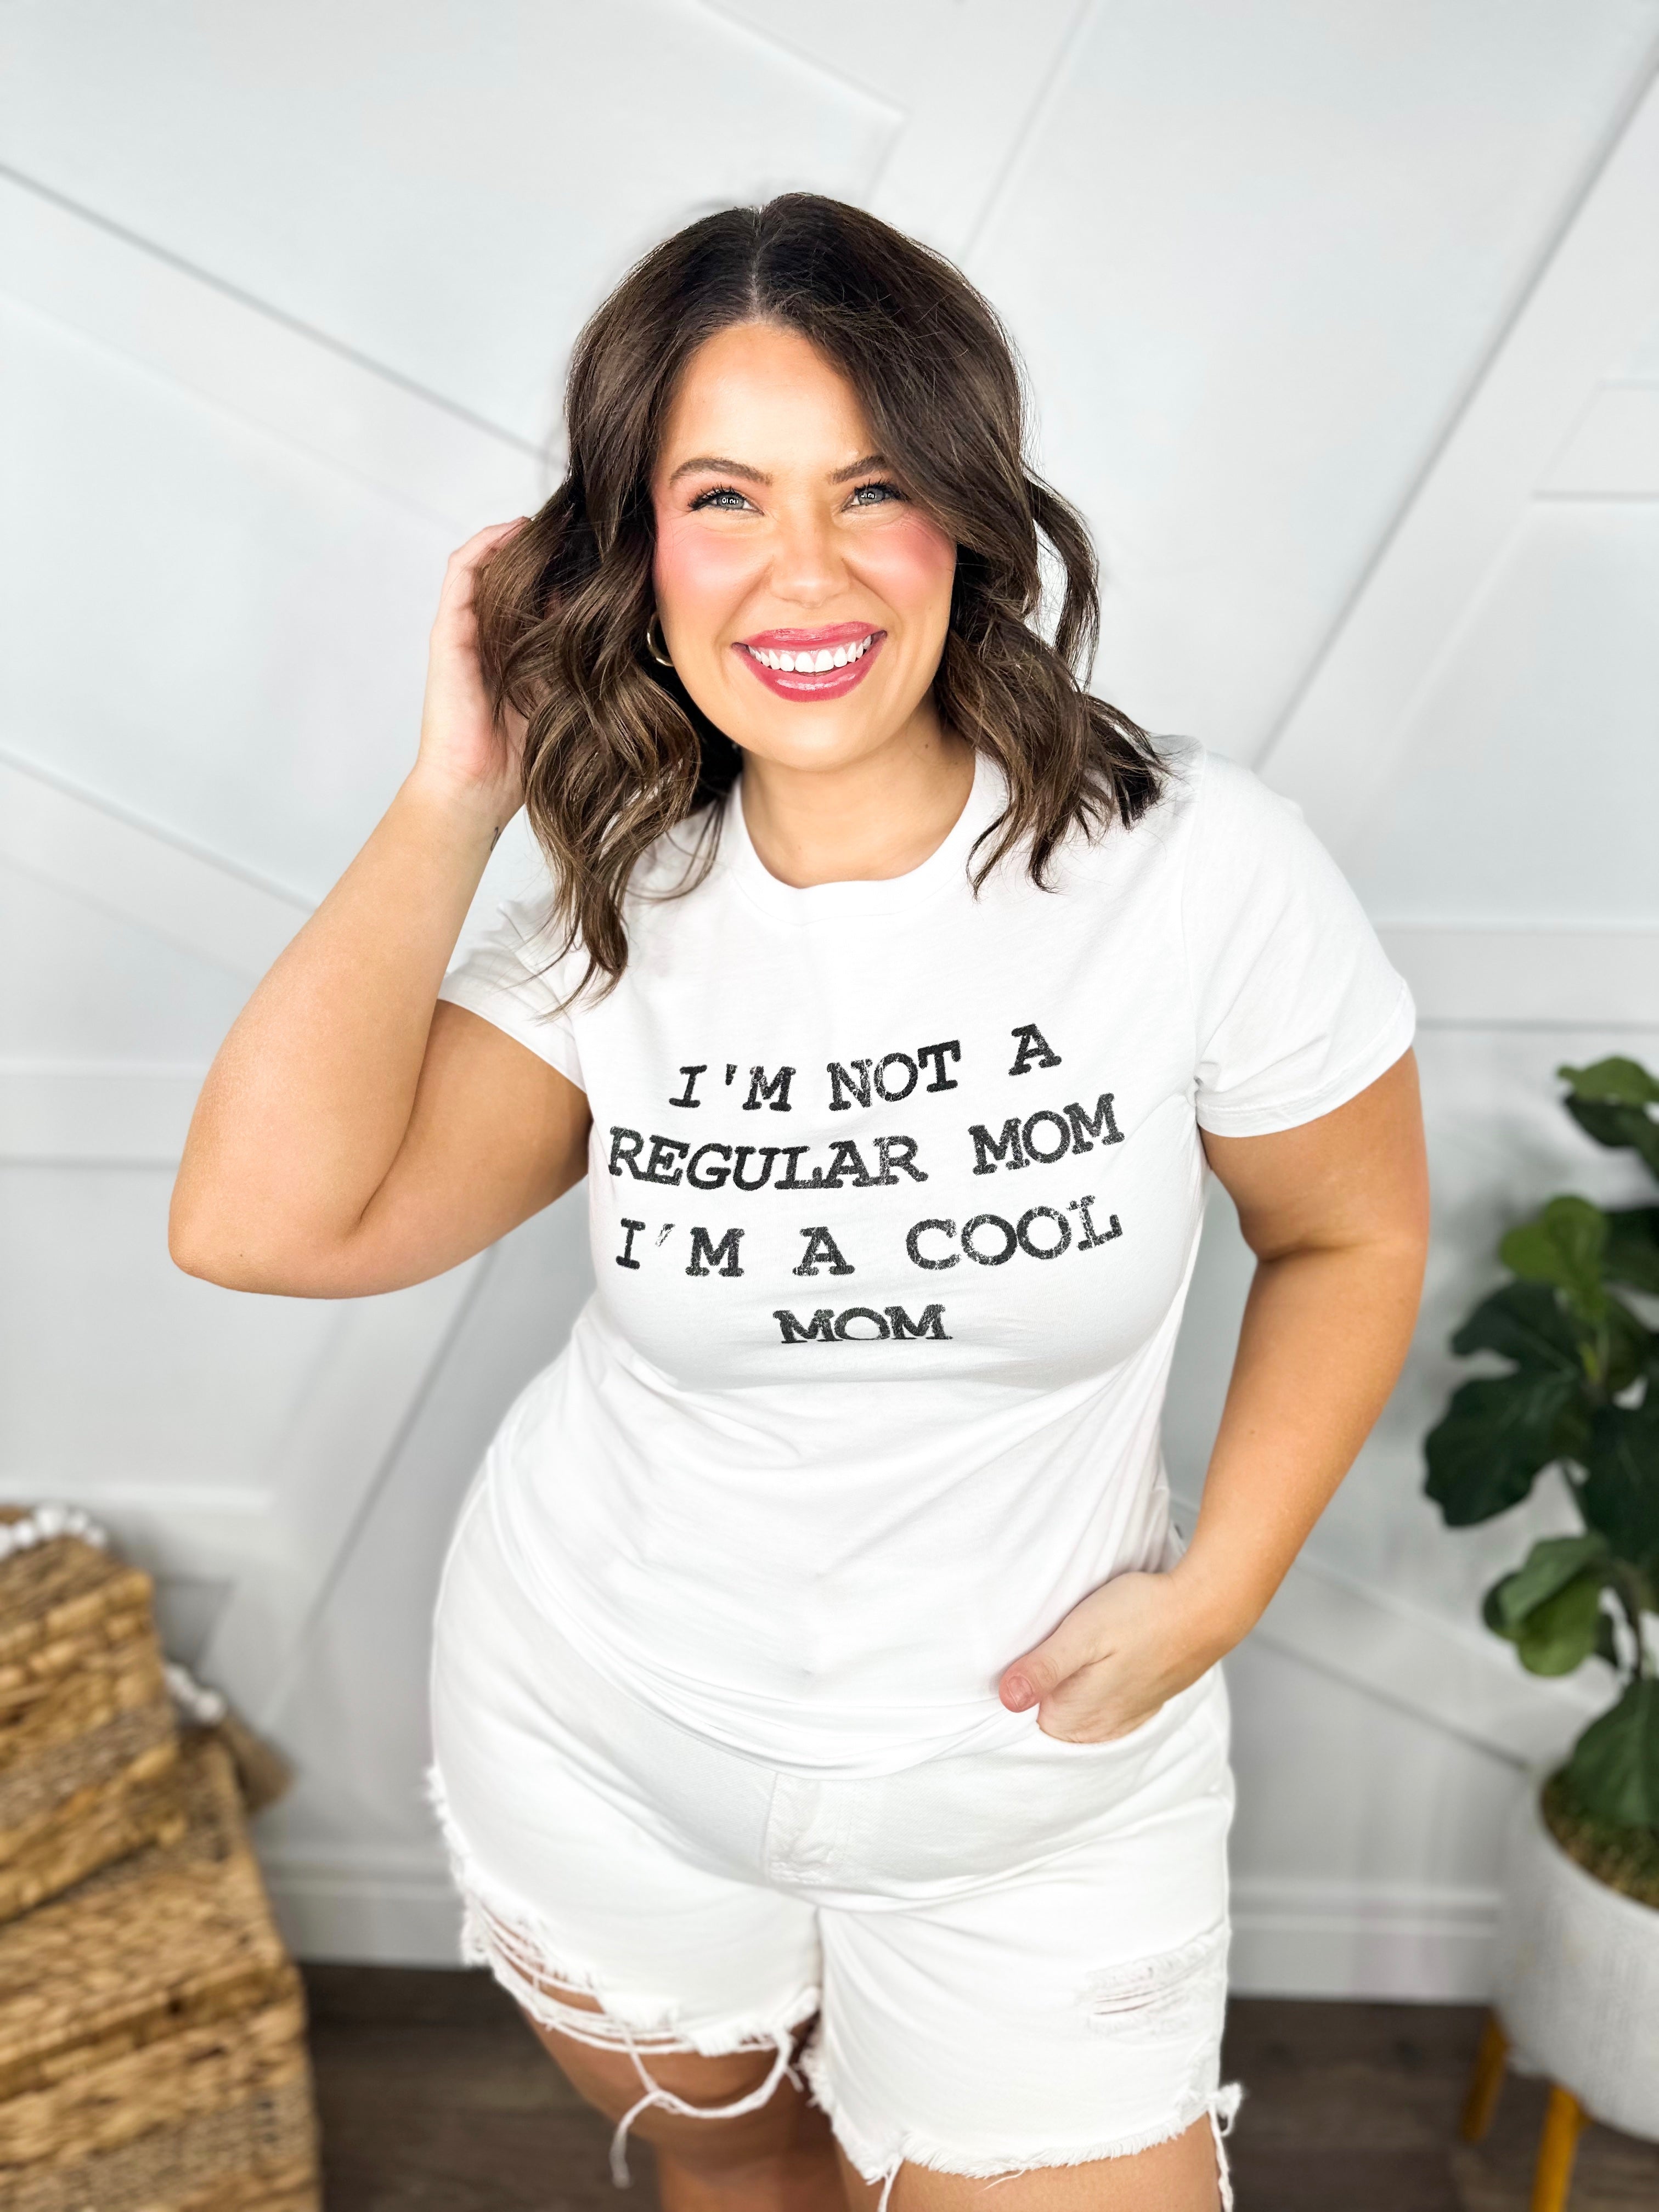 I'm a Cool Mom Graphic Tee-130 Graphic Tees-Prince Peter-Heathered Boho Boutique, Women's Fashion and Accessories in Palmetto, FL